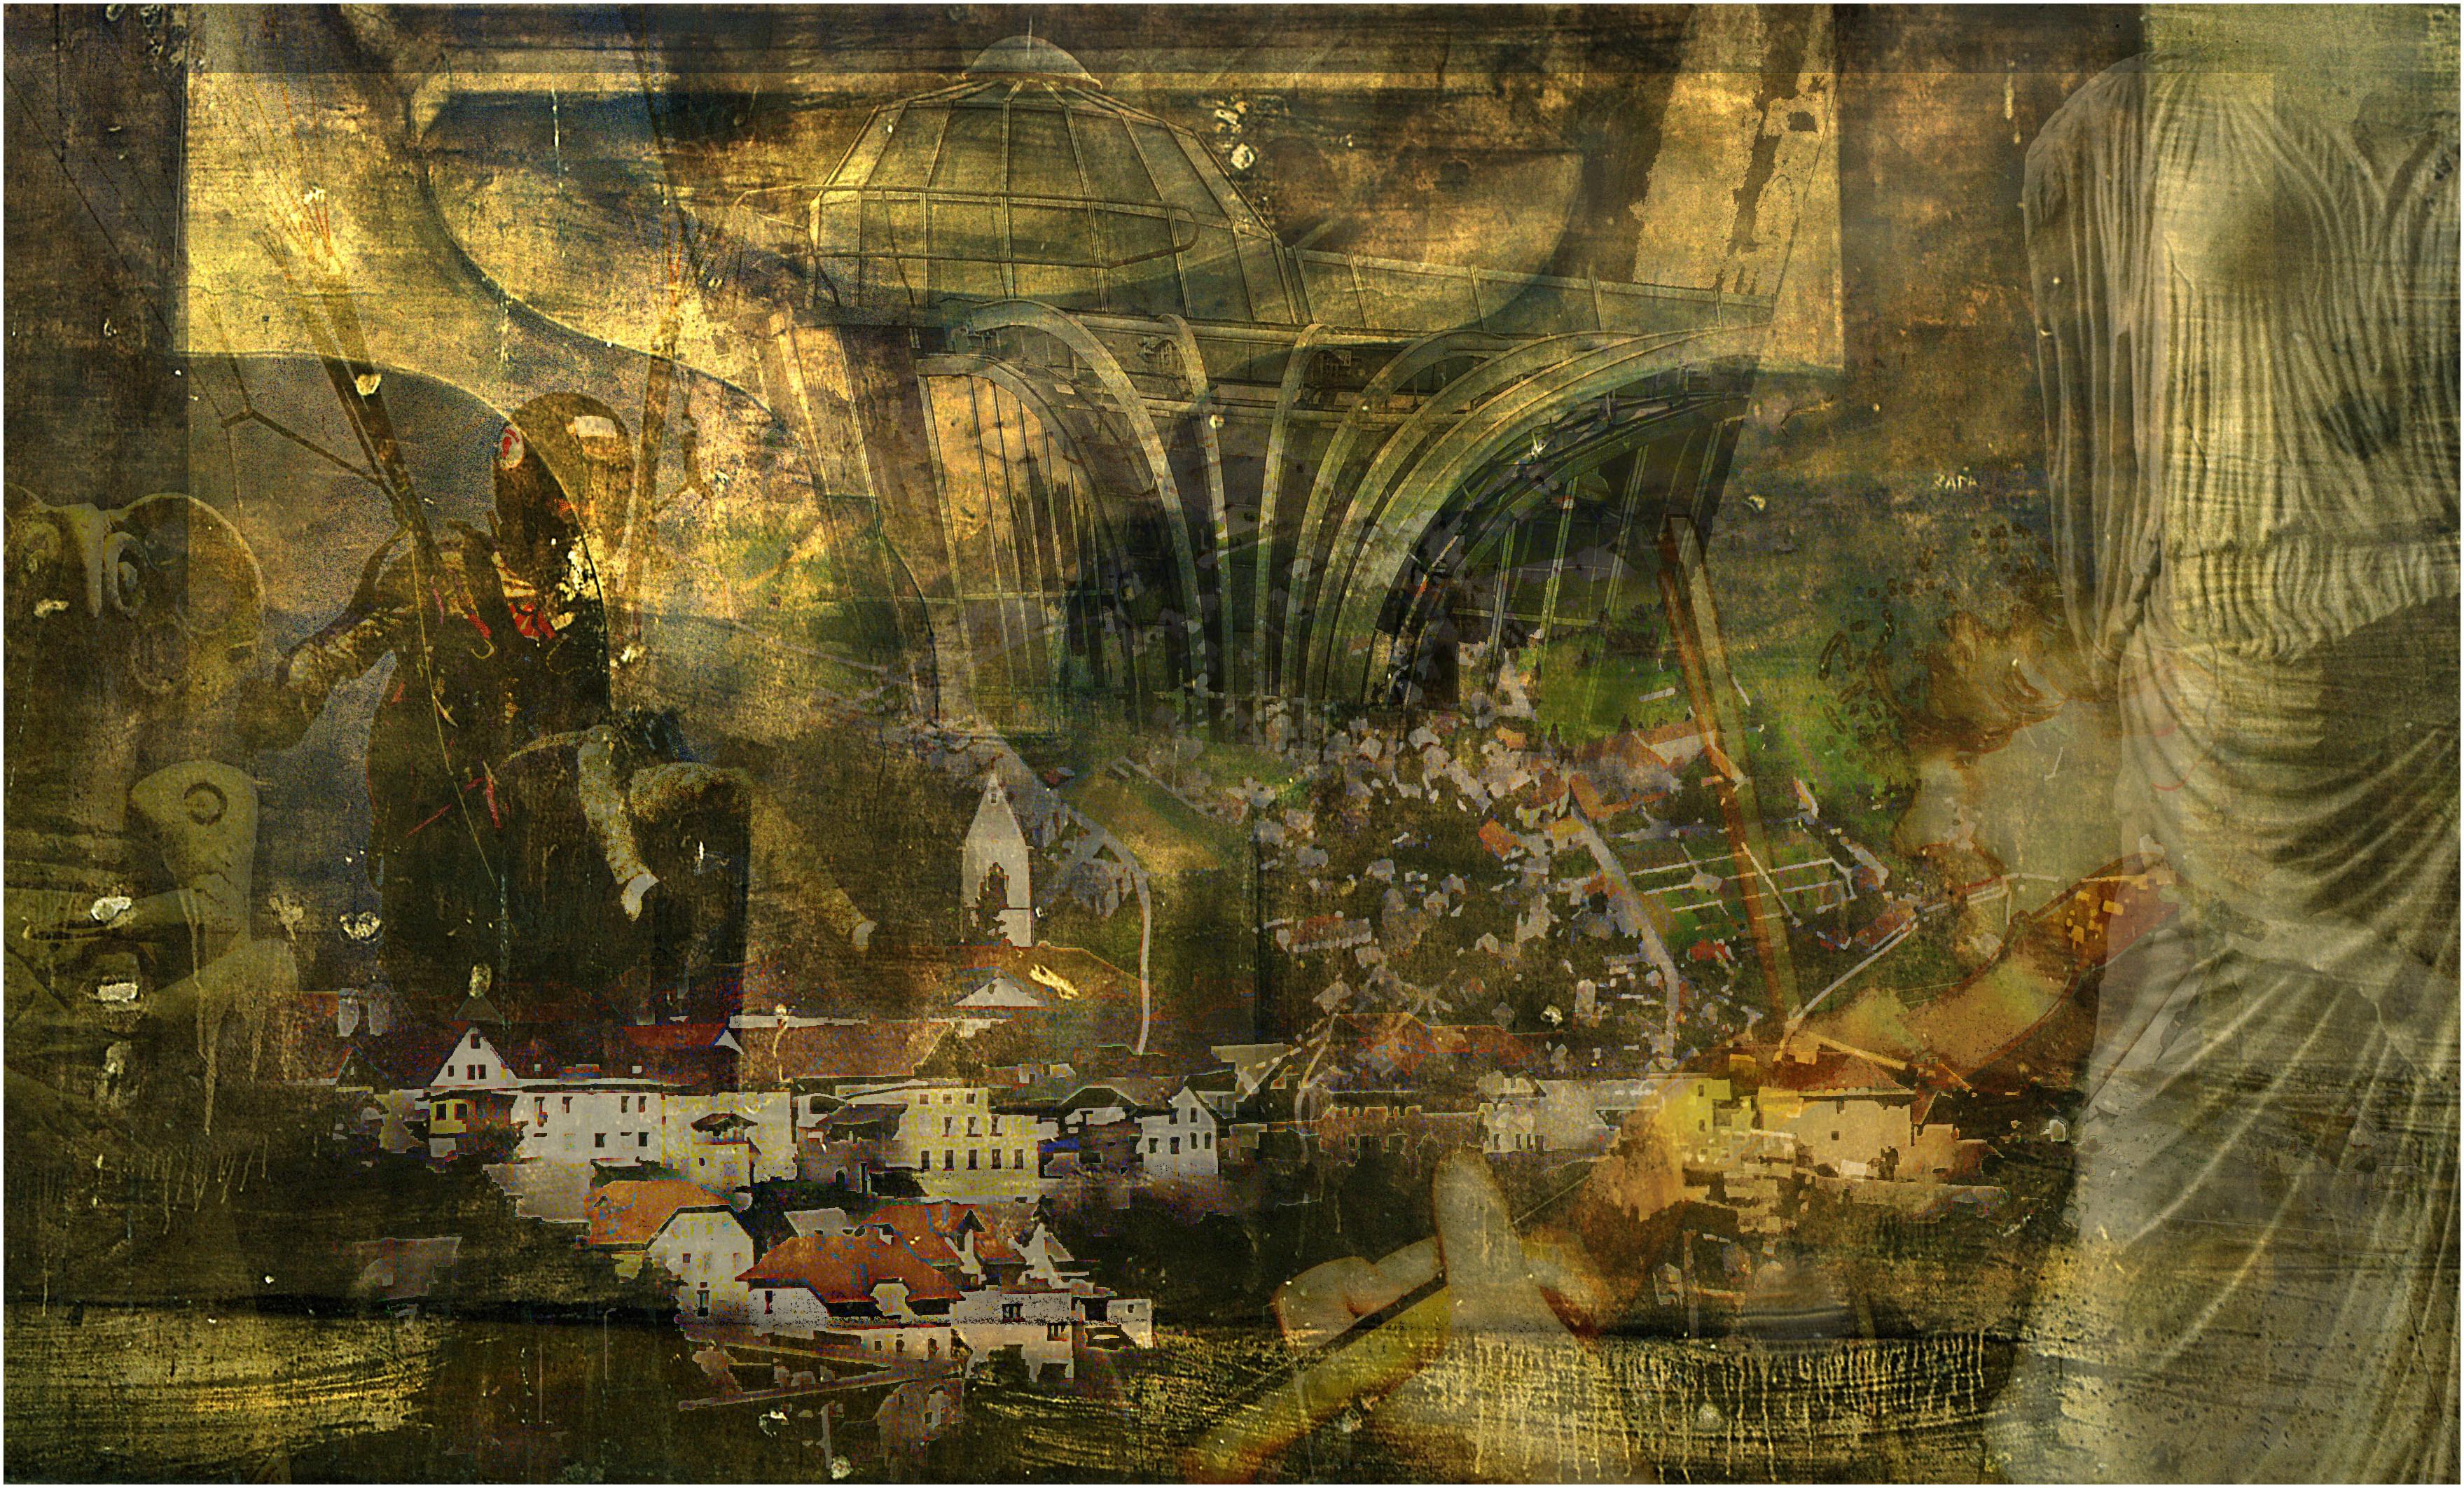 Artist Commentary:
Digital collage, original digital UV print on heavy-stock watercolour paper

Simply the Best 2, online, finalist, 2013

Keywords: collage, industrial, modern, gold, random

Artist Biography: 
Brut Carniollus is a visual artist and